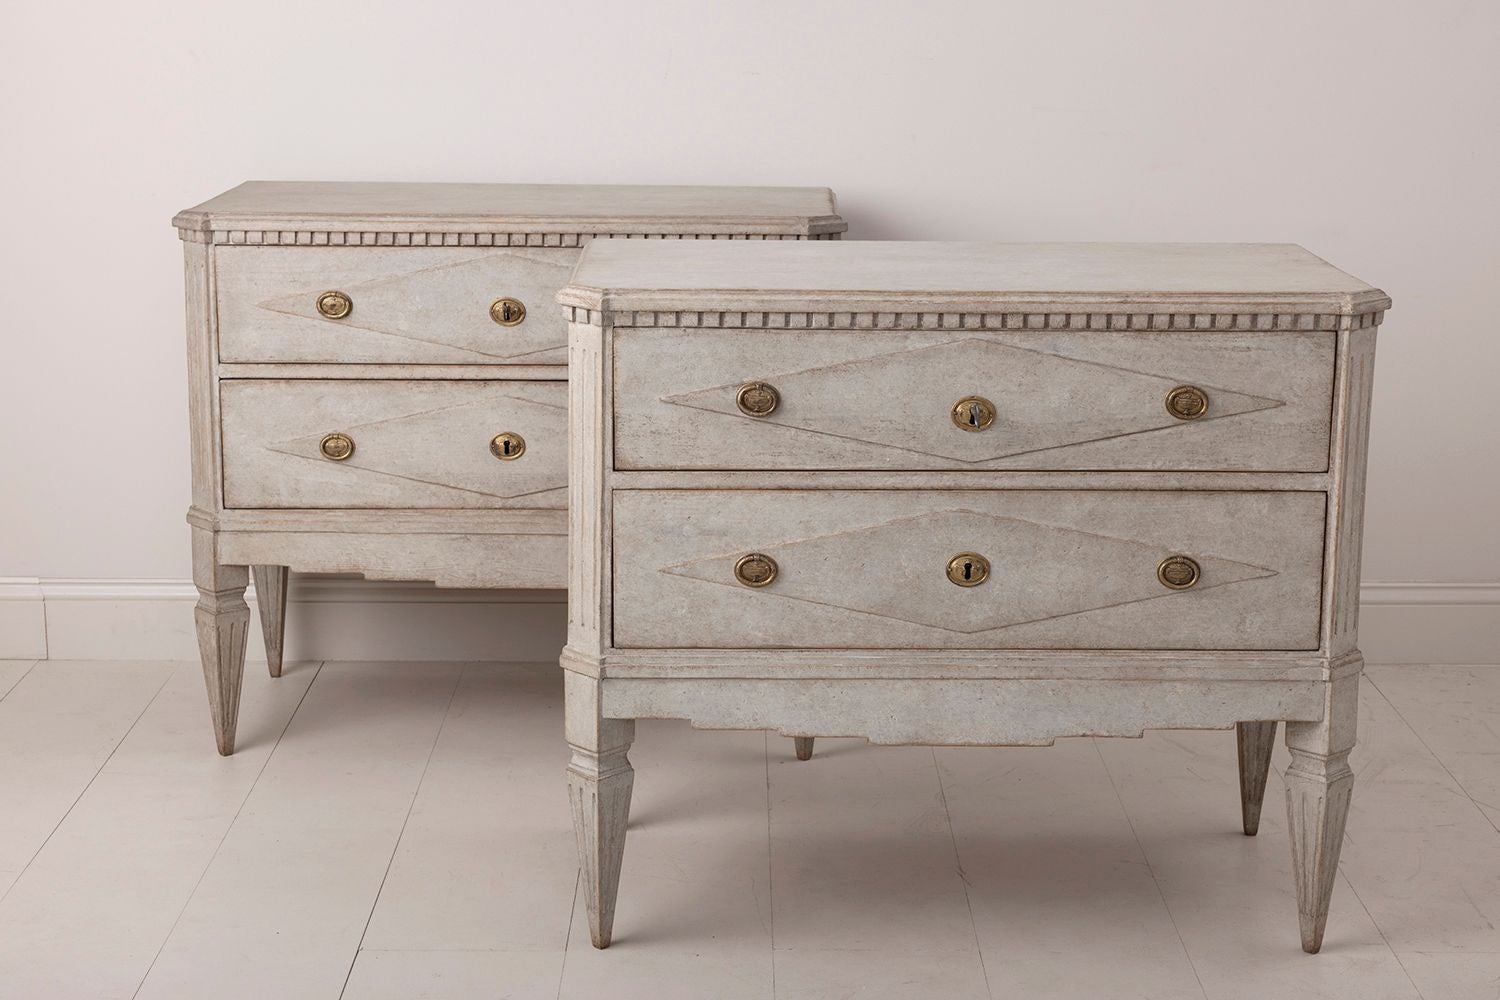 A pair of Swedish commodes in the Gustavian style. These chests feature a raised lozenge design on the drawer fronts with dentil molding around the tops of the commodes. Two large drawers, brass hardware, canted and fluted corner posts, and tapered